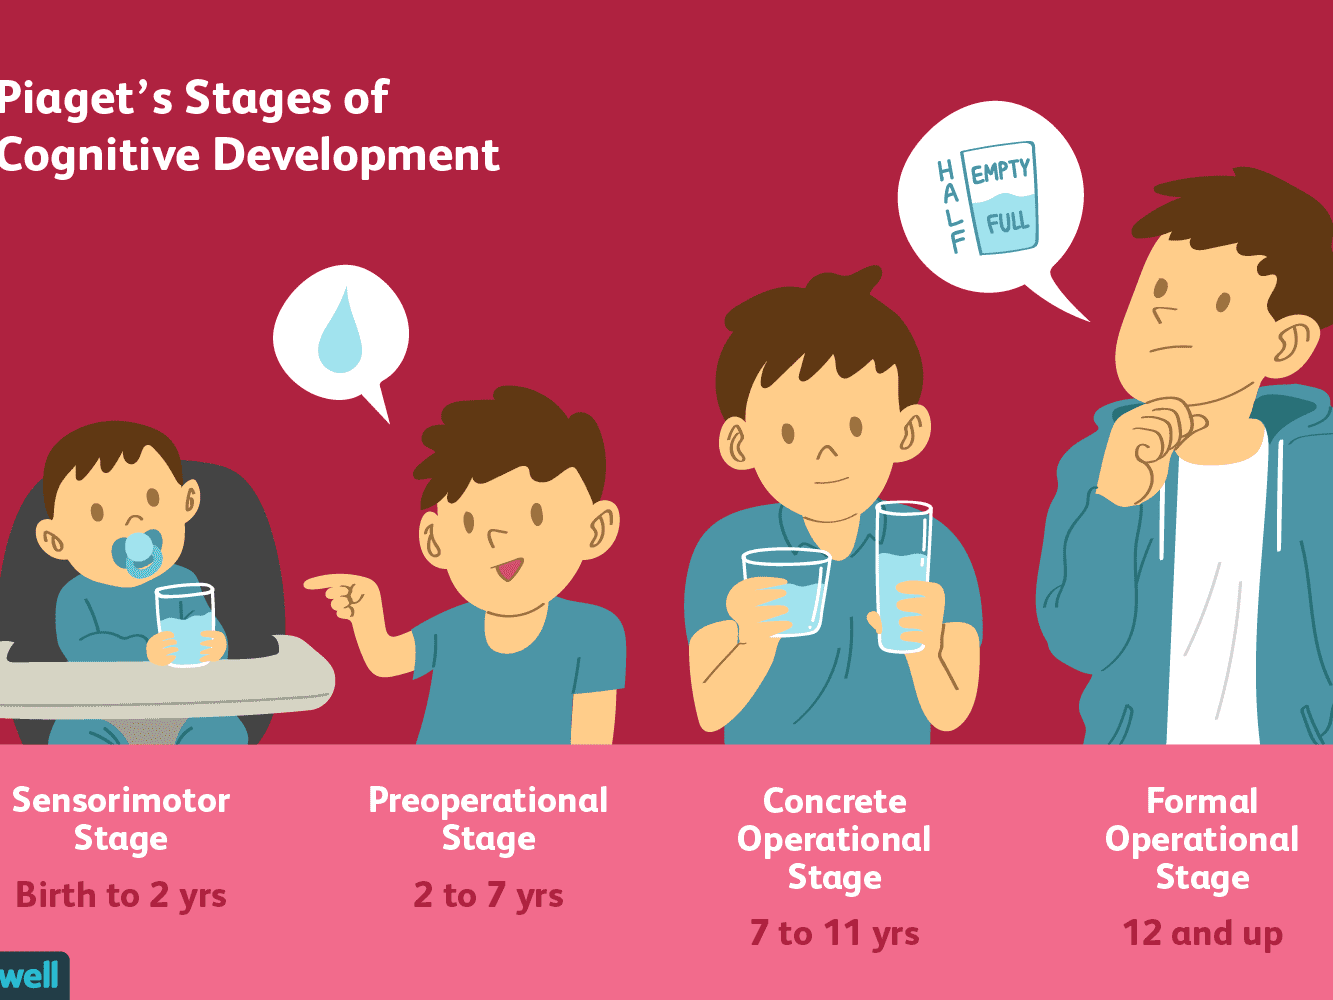 piagets-stages-of-cognitive-development-5a95c43aa9d4f900370bf112.png